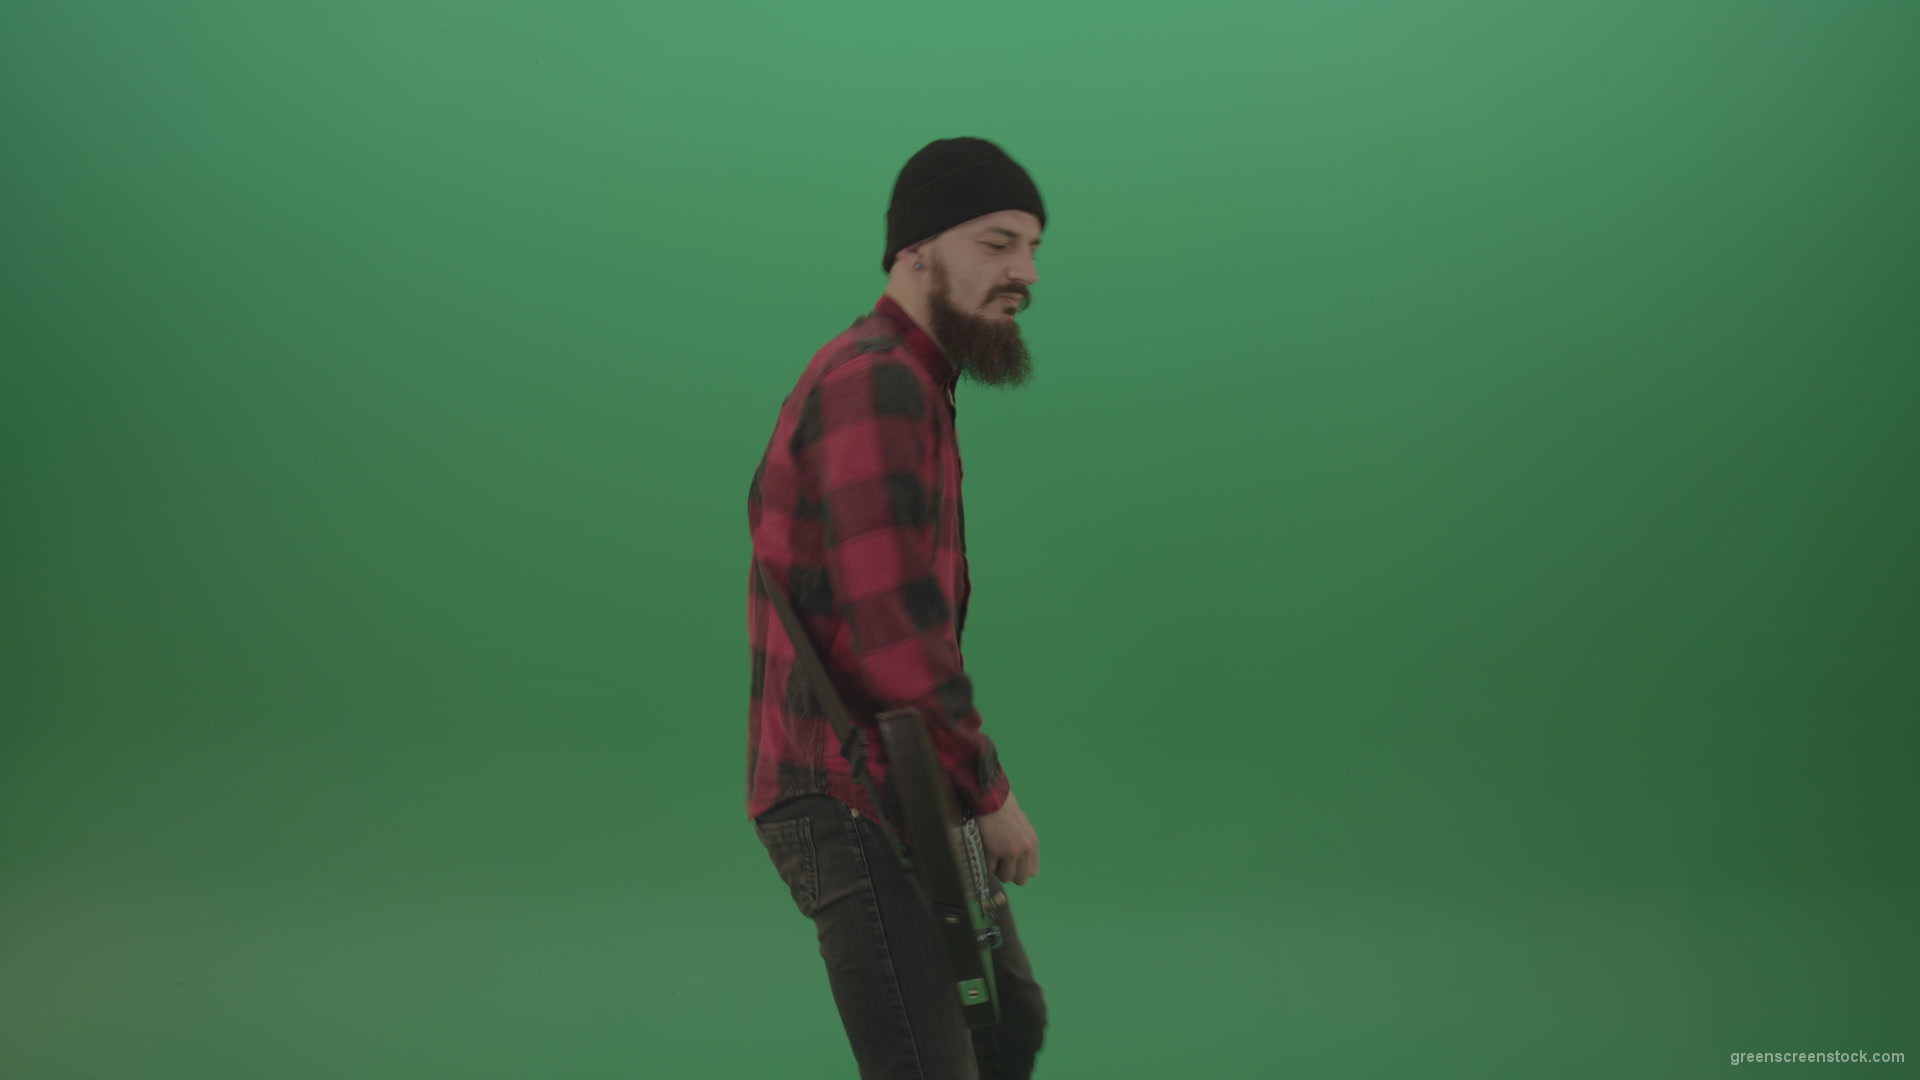 Young-man-with-beard-play-hardcore-music-on-guitar-in-side-view-on-green-screen-chromakey-background_008 Green Screen Stock